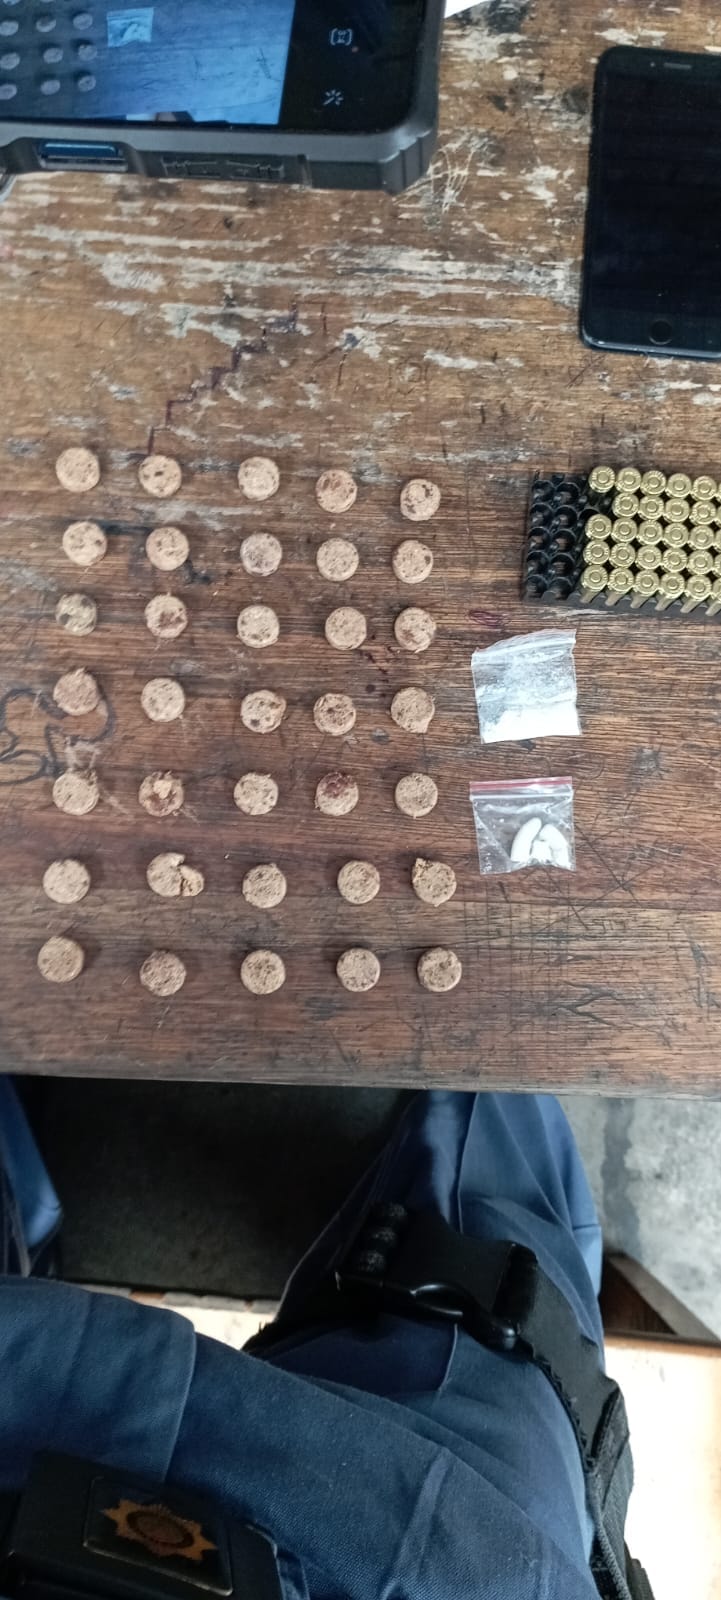 Male arrested at Morningside area for possession of drugs and ammunition